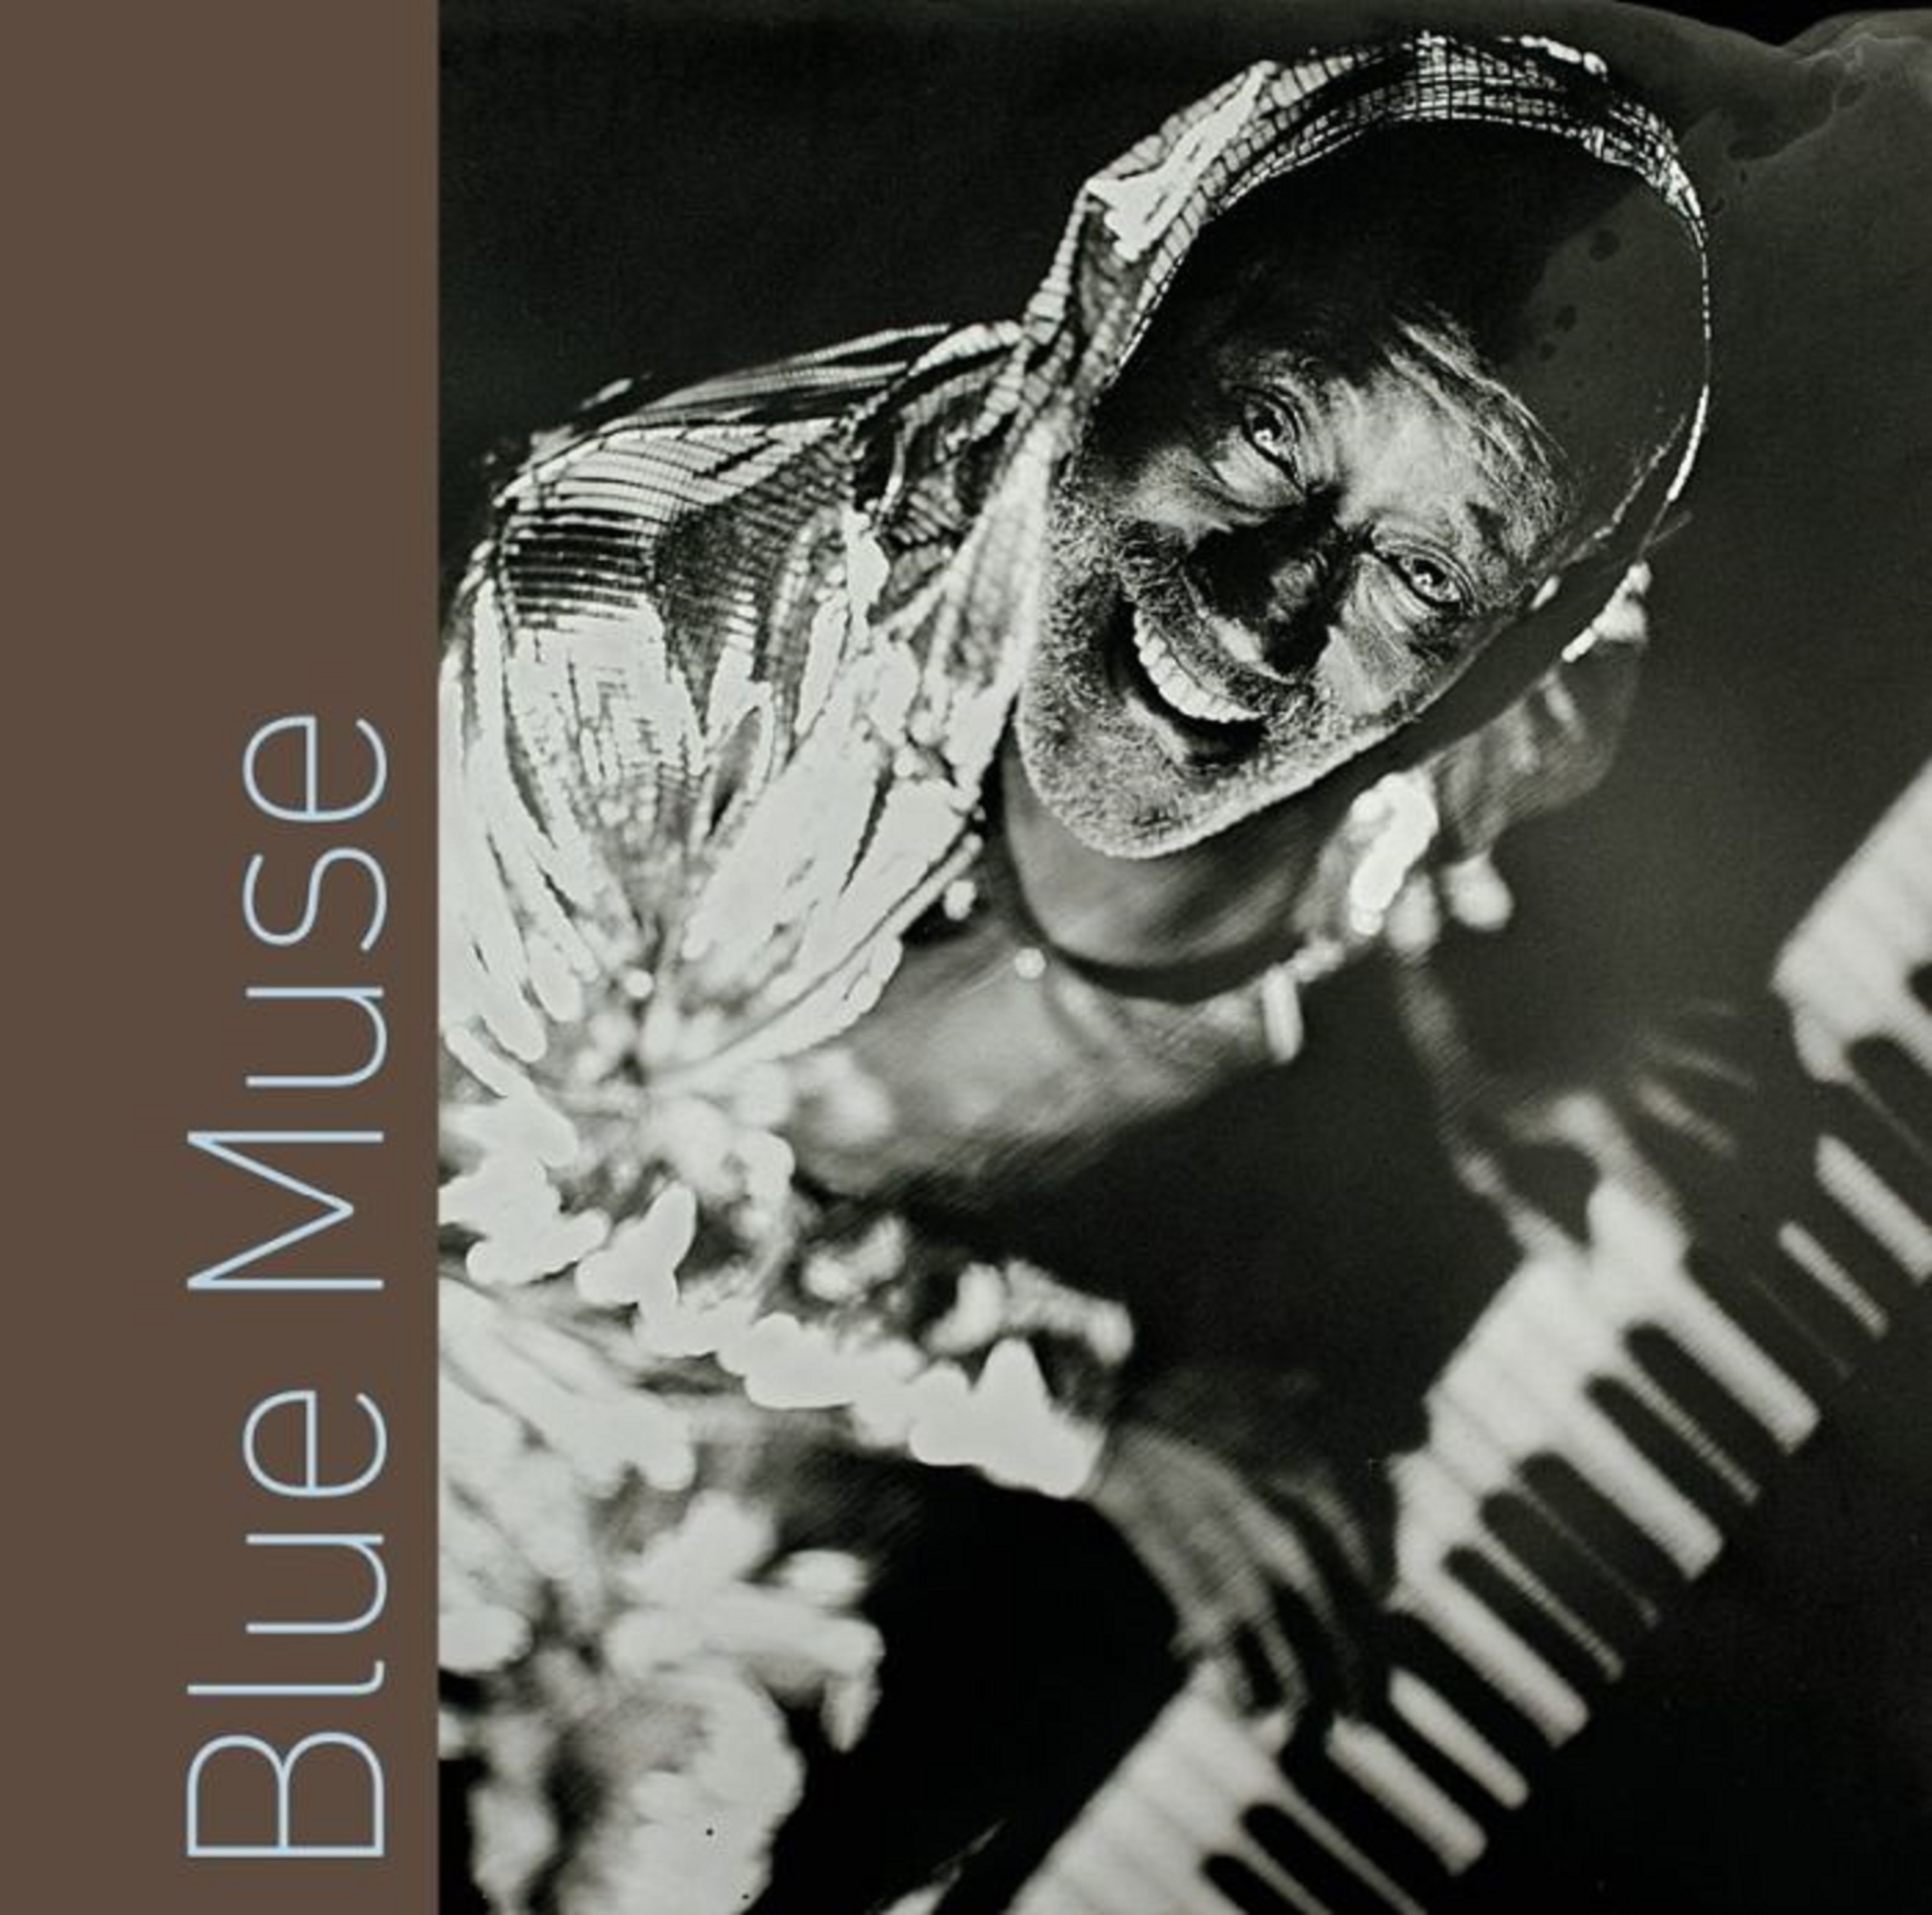 MUSIC MAKER RELIEF FOUNDATION’s 25TH ANNIVERSARY COMPILATION ‘BLUE MUSE,’ OUT FEB. 1